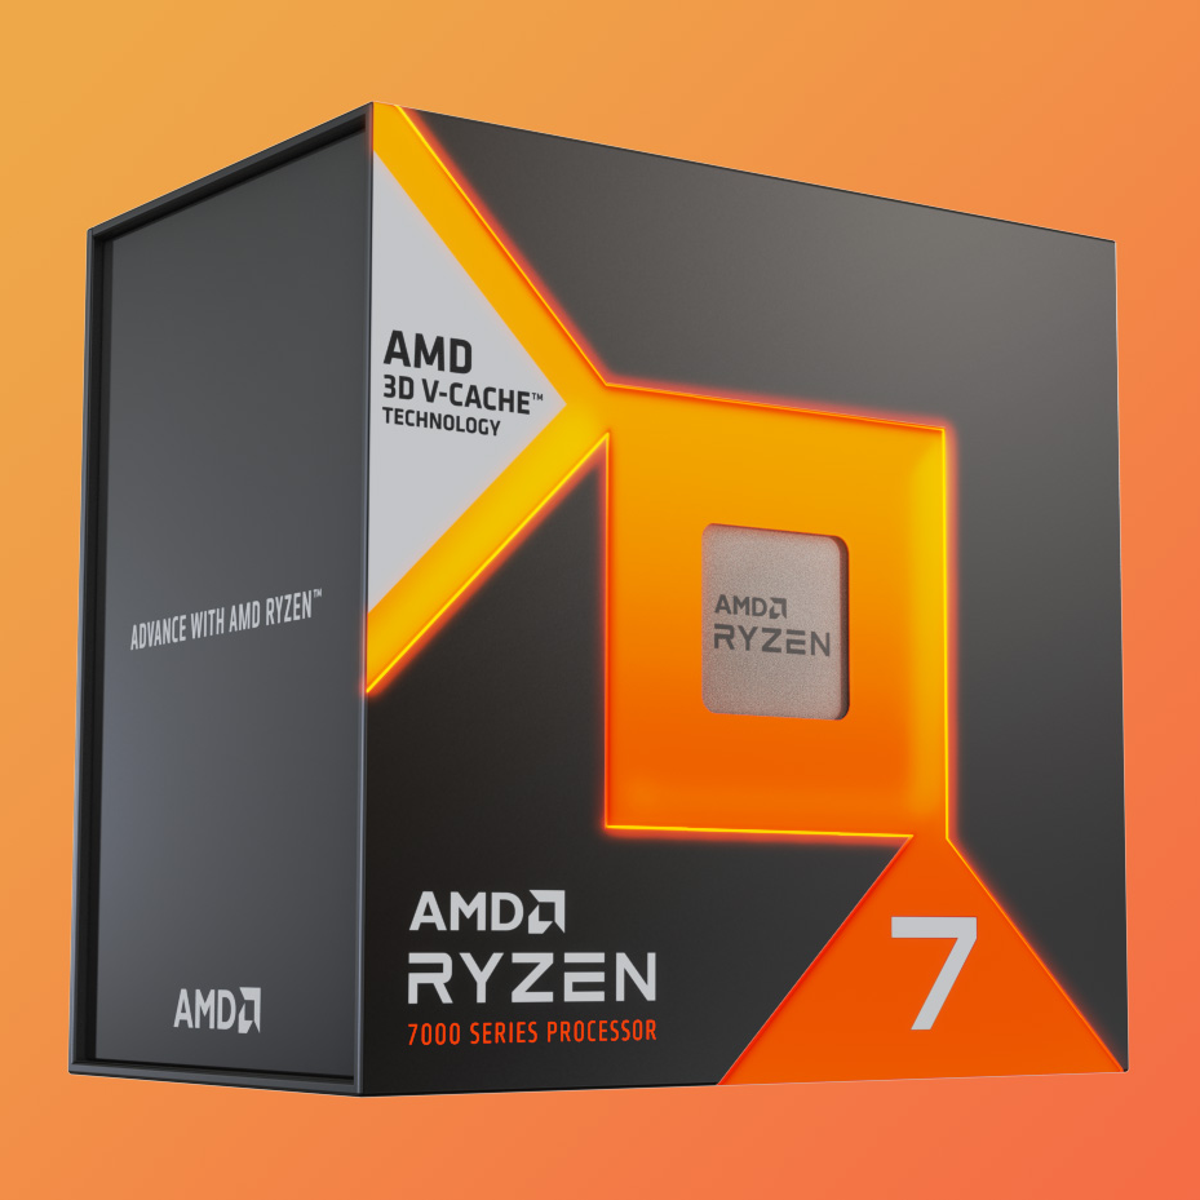 AMD Ryzen 7 7800X3D review: faster than 13900K and 7950X3D for gaming?